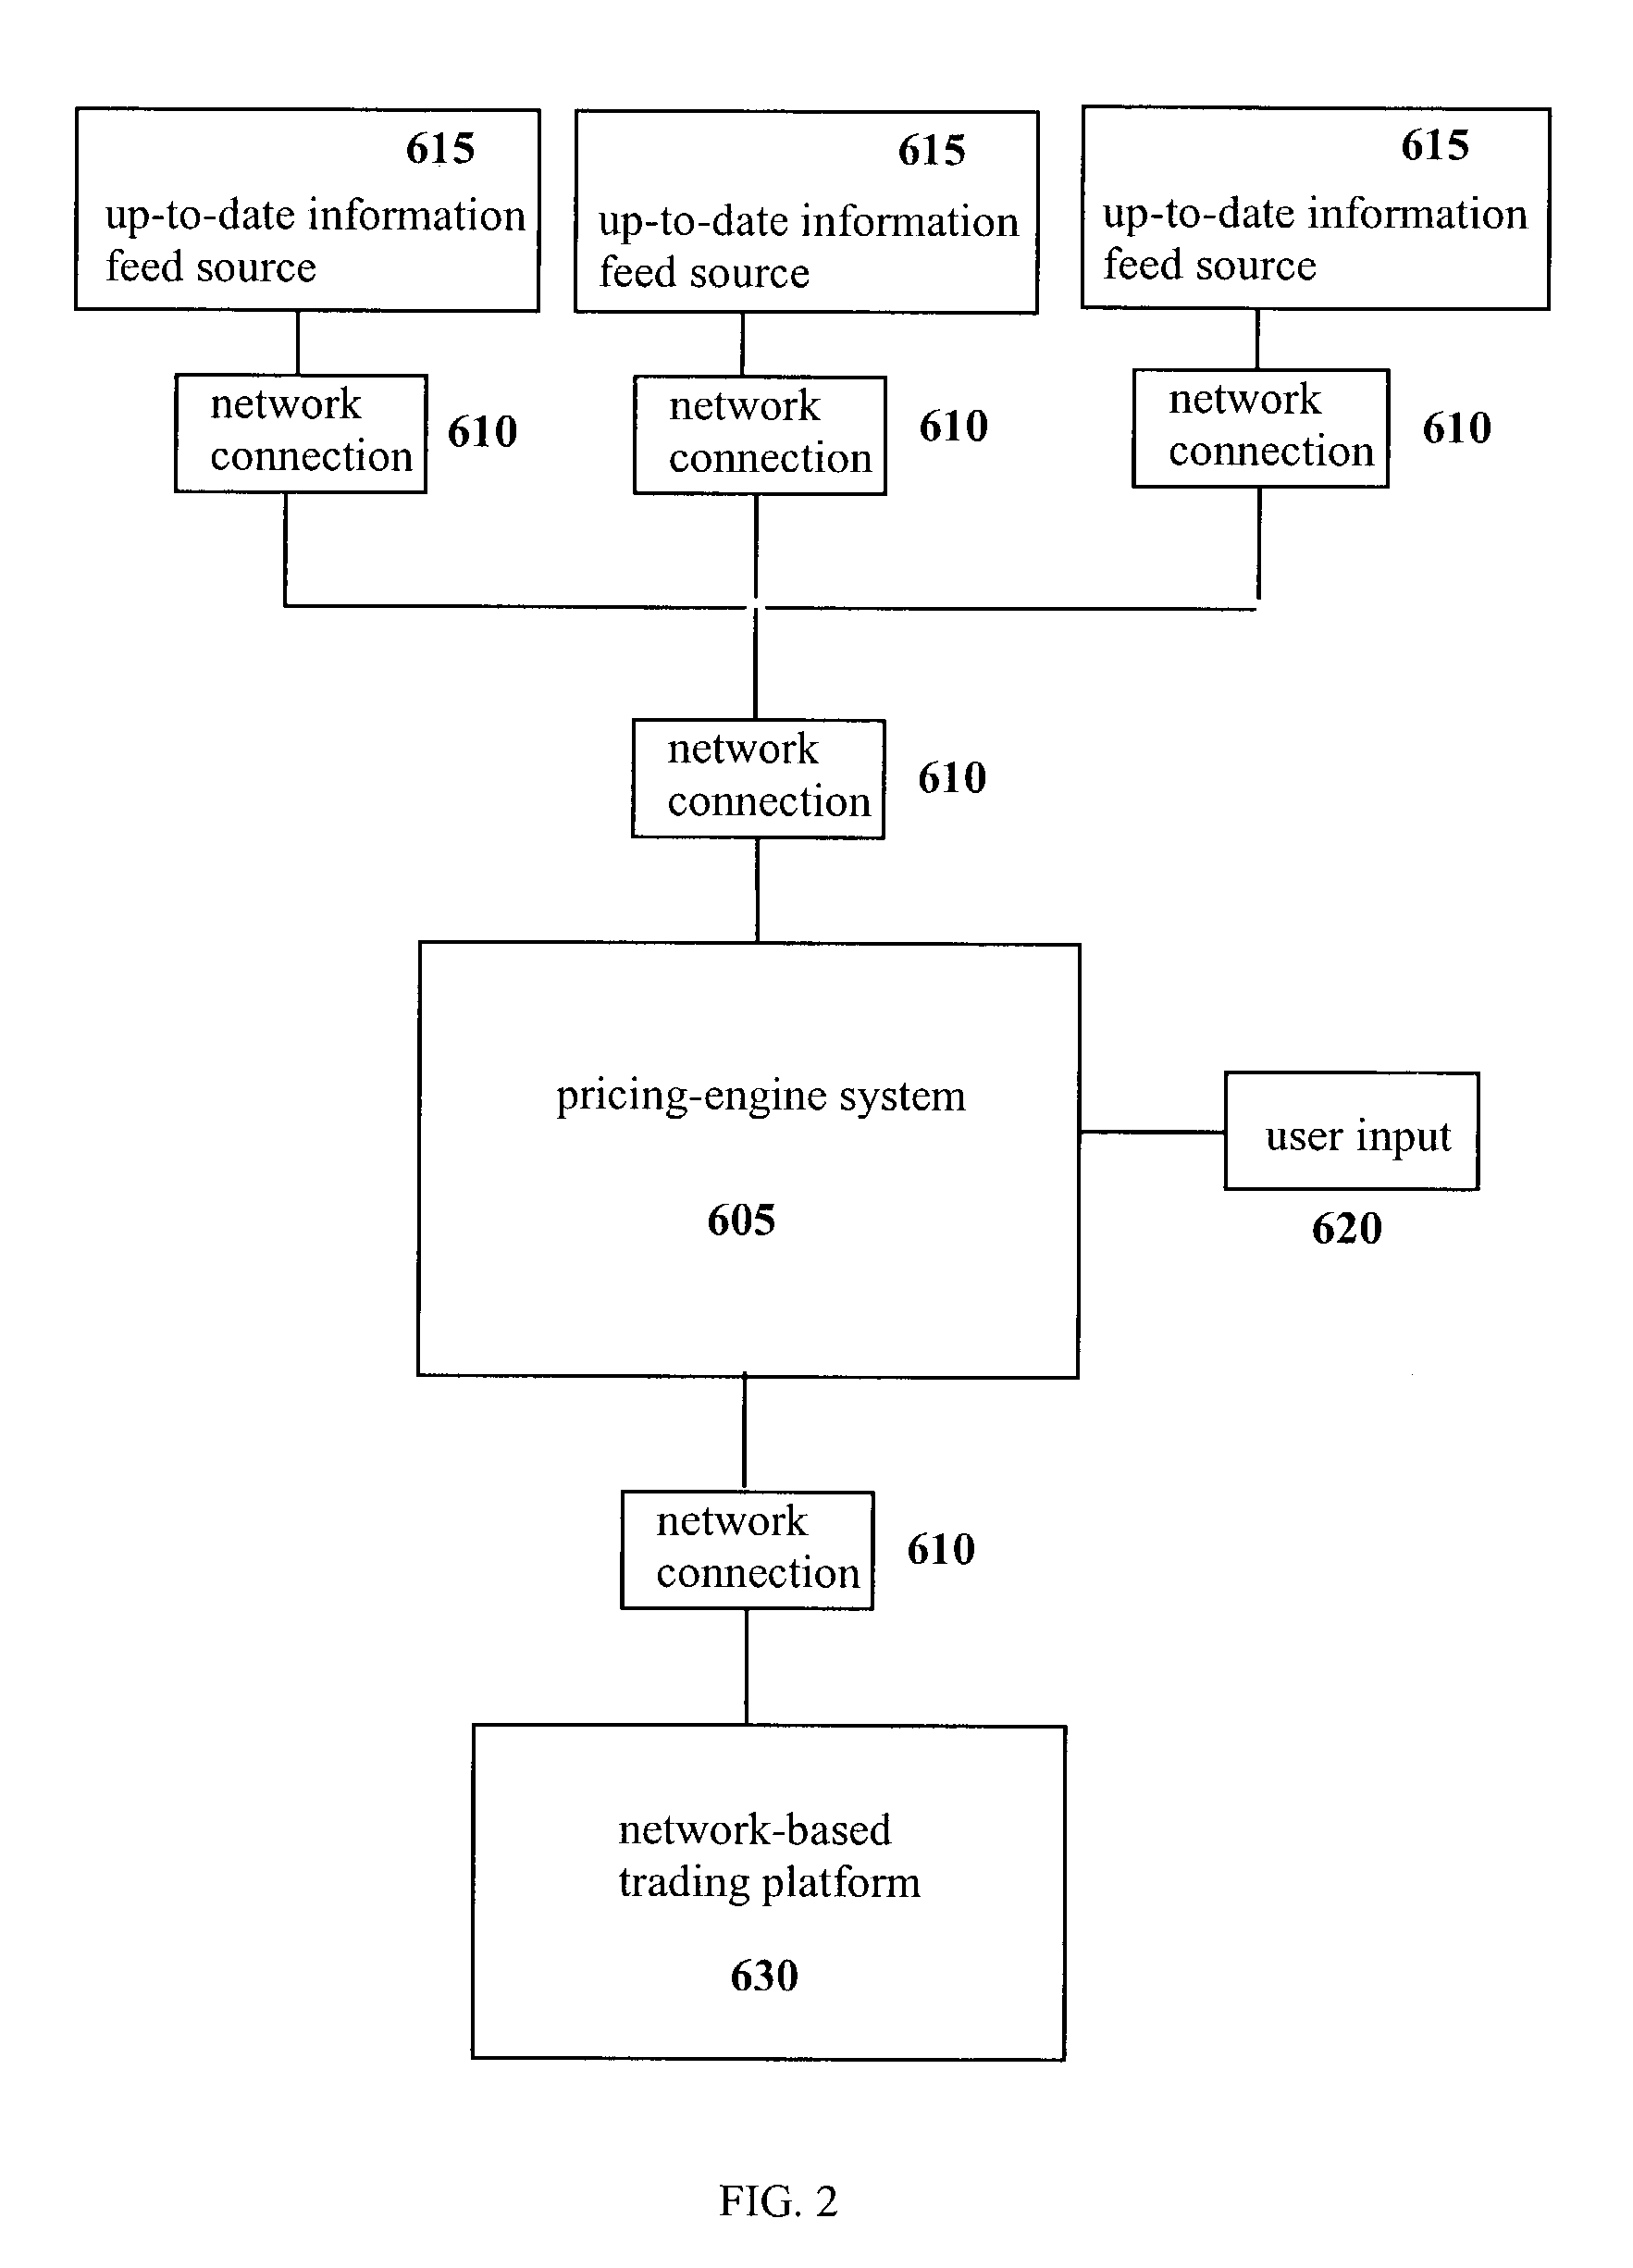 Systems and methods for distributing pricing data for complex derivative securities